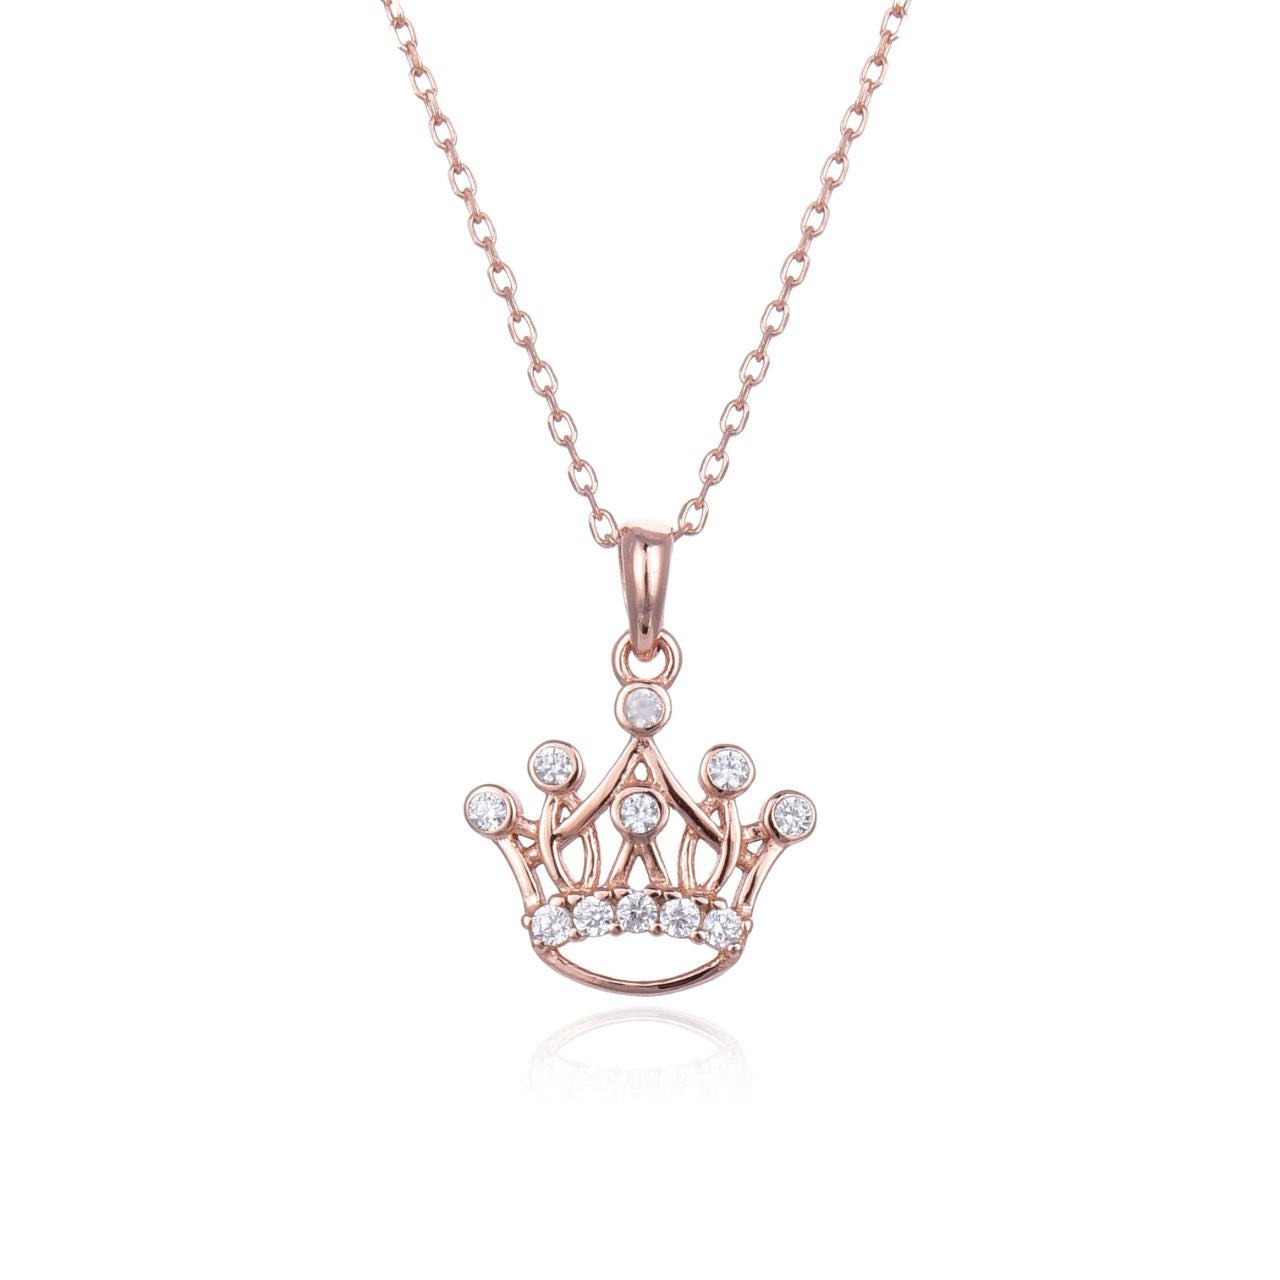 Rose Gold Jewelled Crown Necklace  Rose gold plated sterling silver crown necklace with cubic zirconia stones.